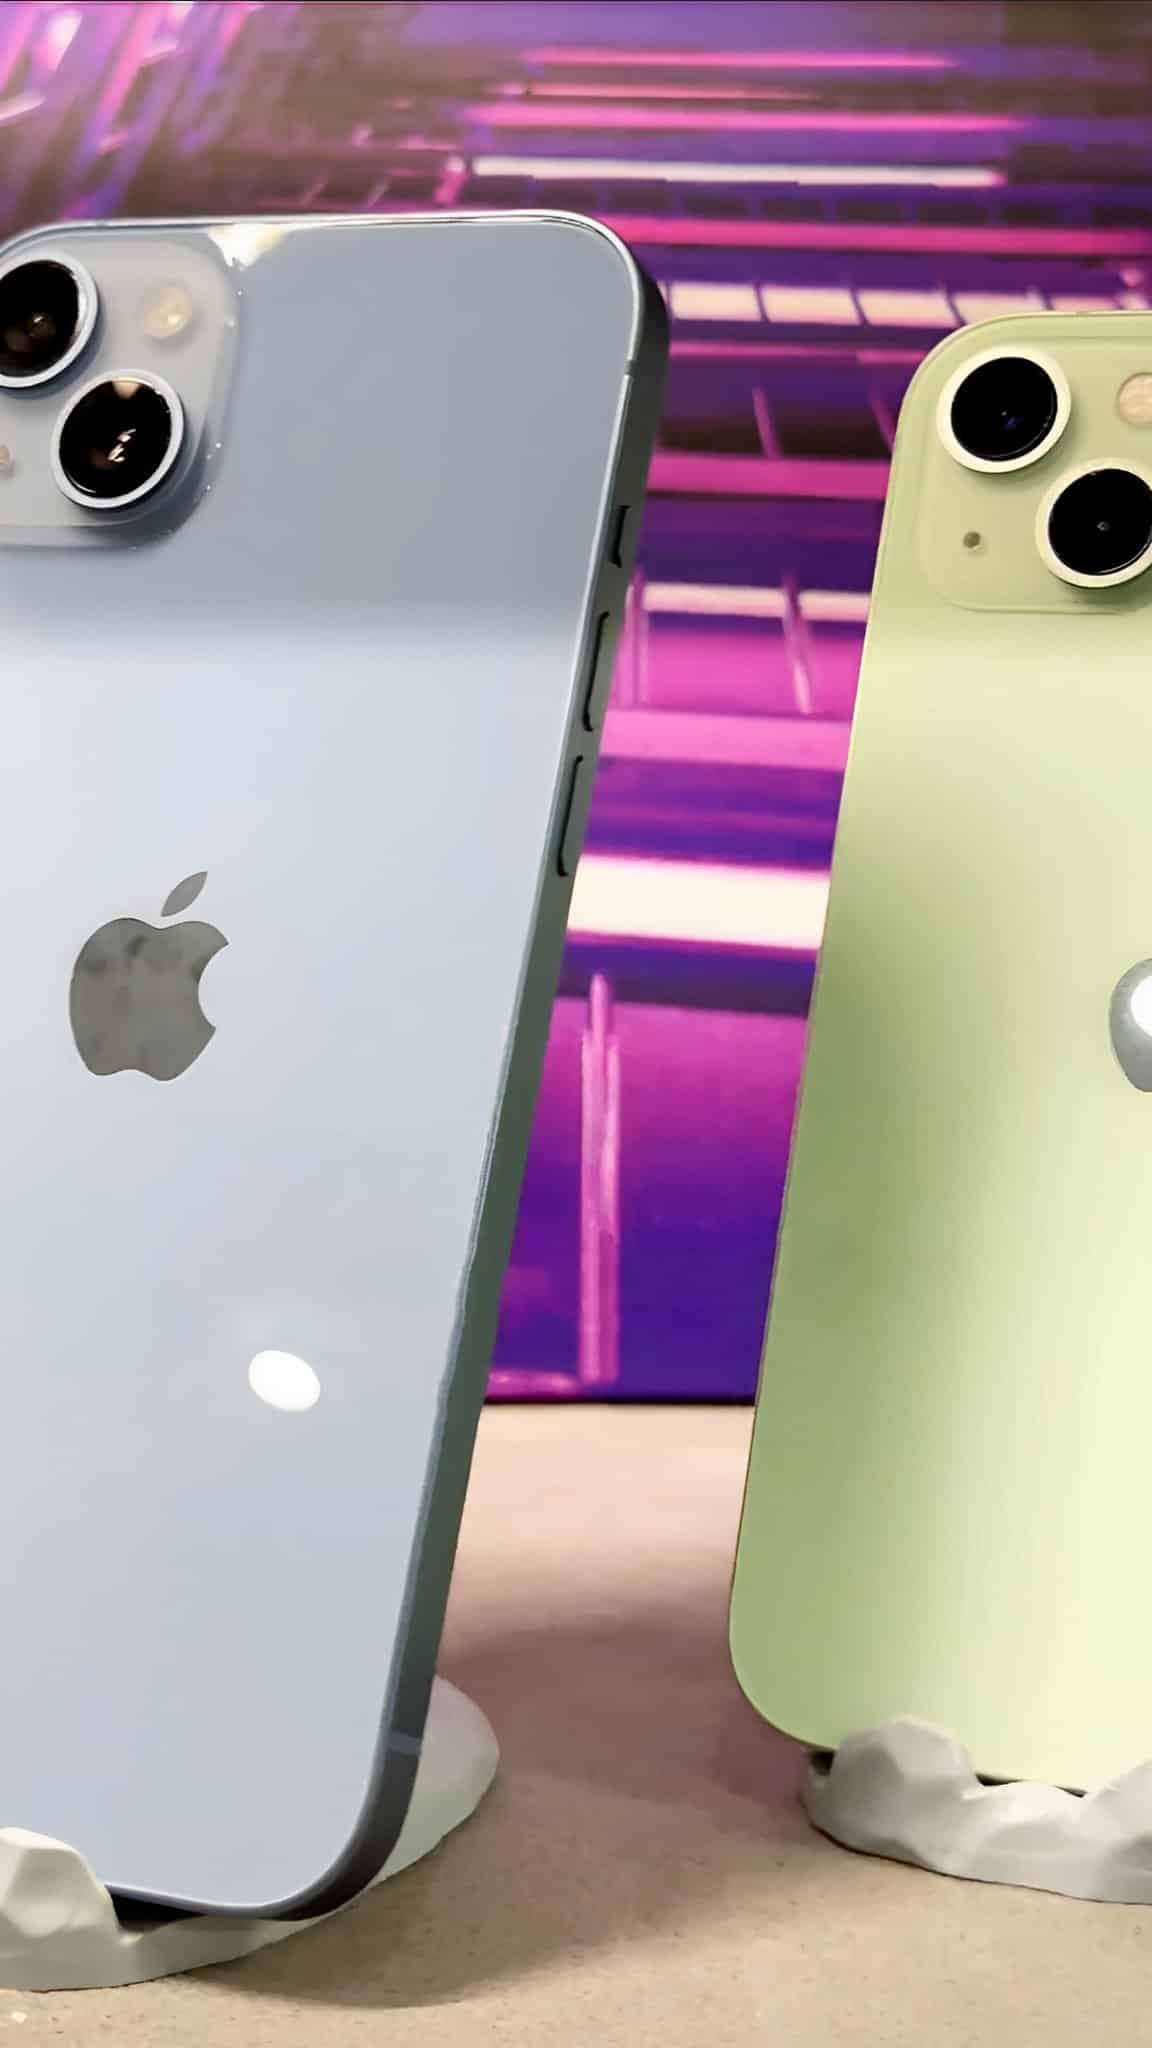 Colour Variants for iPhone 15 Pro and iPhone 15 Pro Max